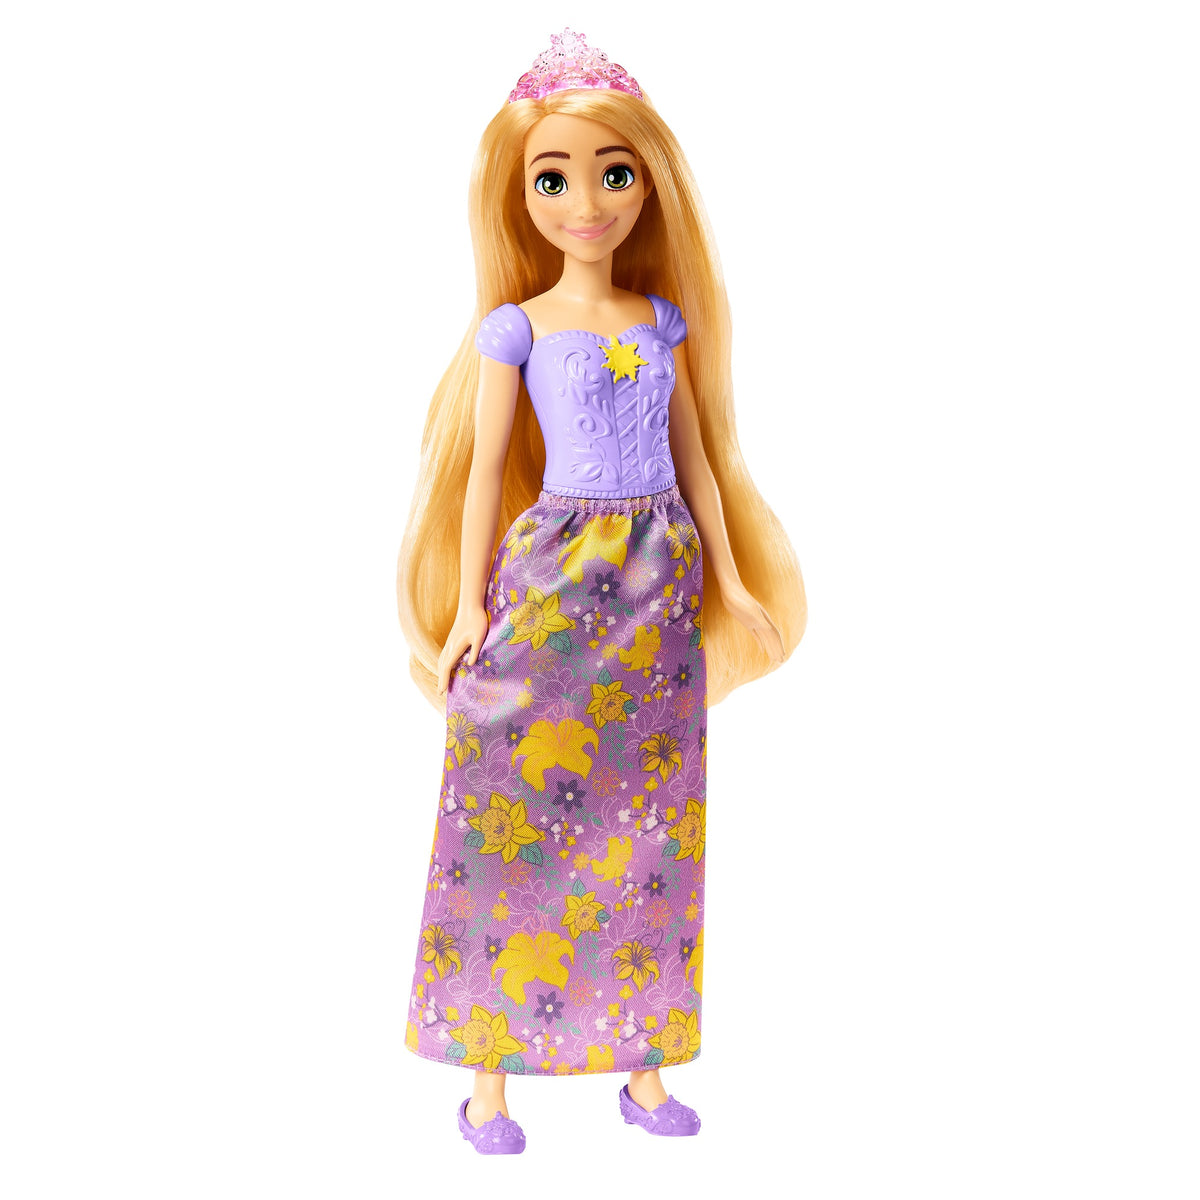 Disney Princess Posable Rapunzel Fashion Doll with Clothing and Accessories Inspired by the Disney Movie for Kids Ages 3+